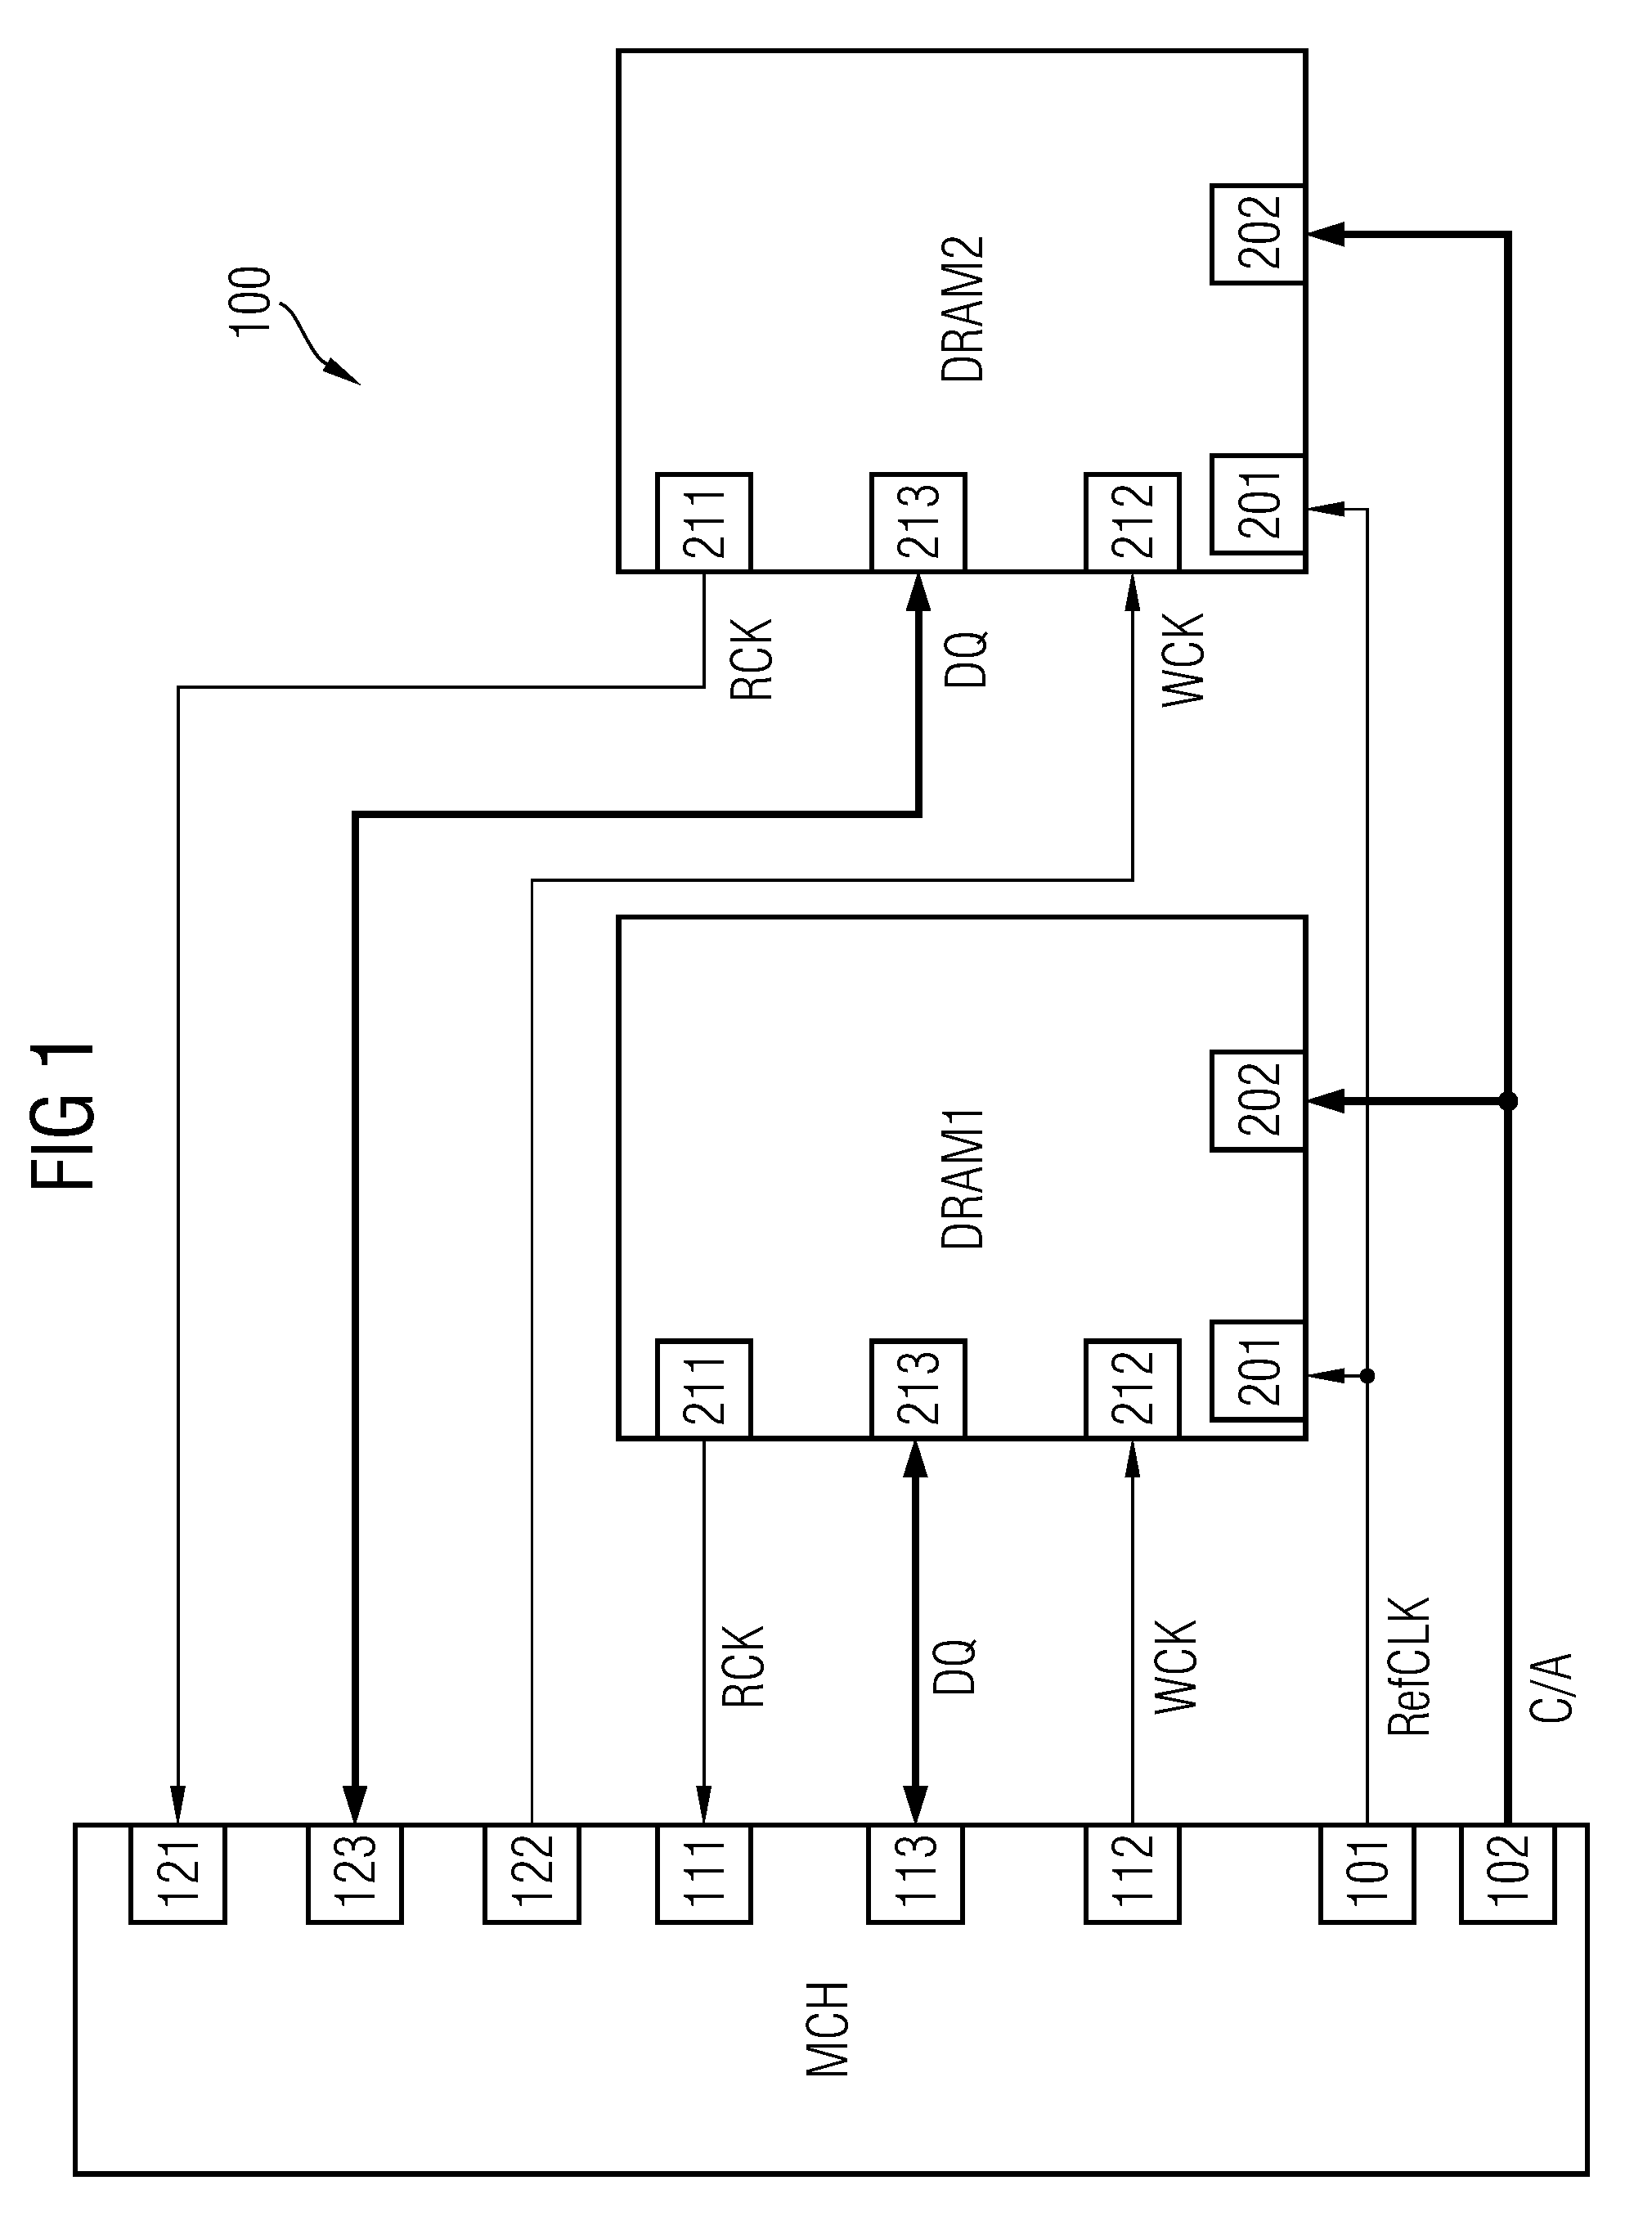 Memory device and memory system comprising a memory device and a memory control device